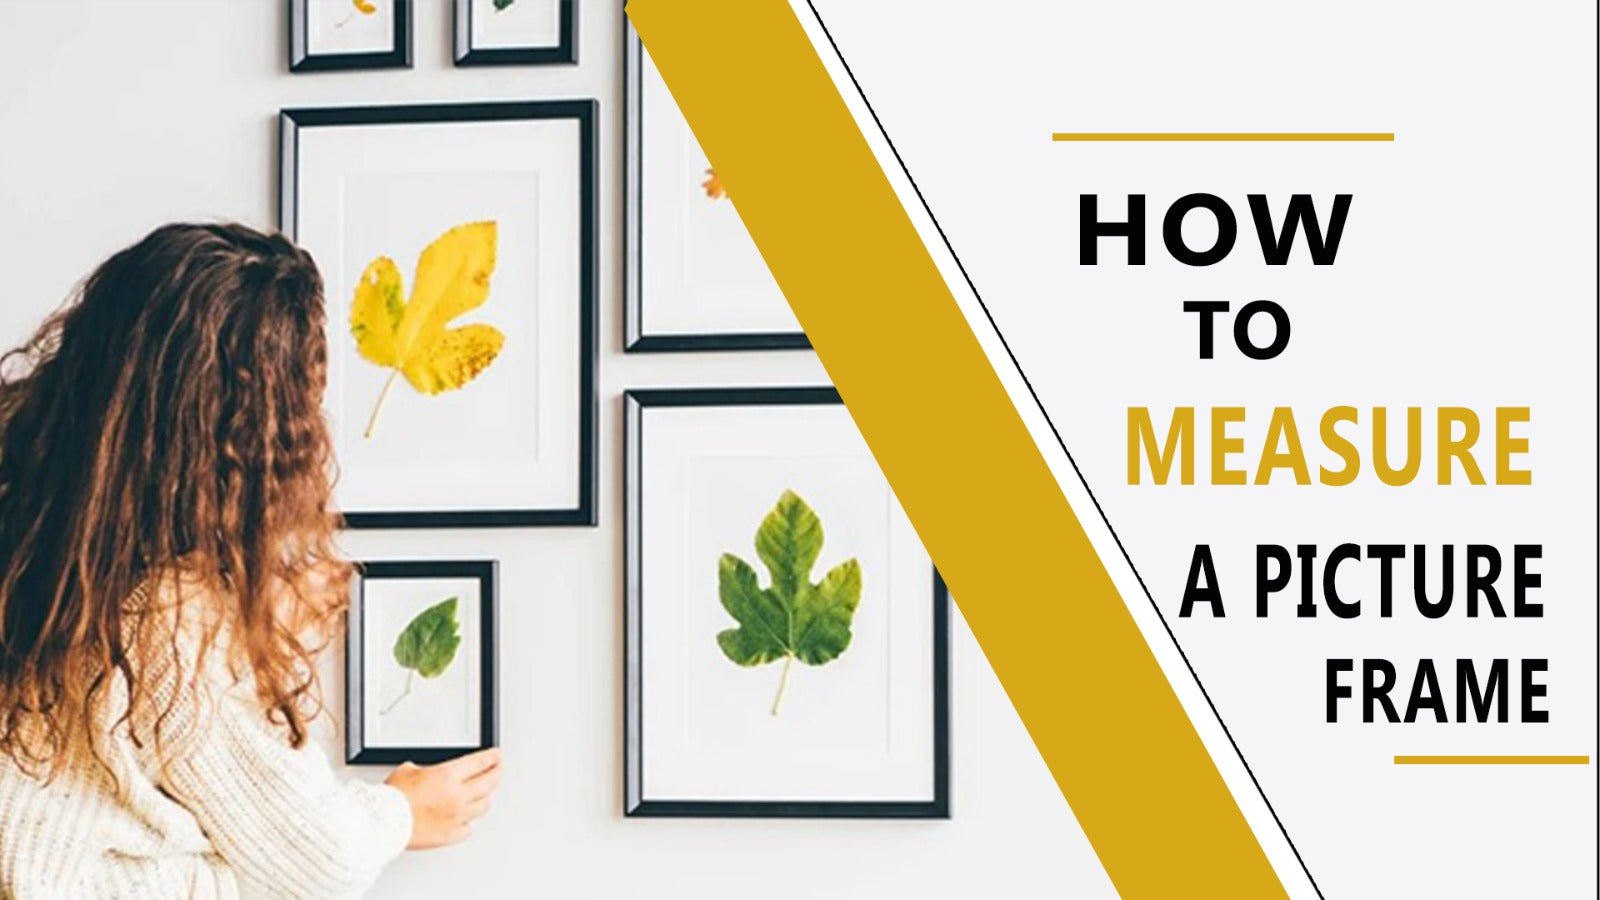 How to measure a picture frame